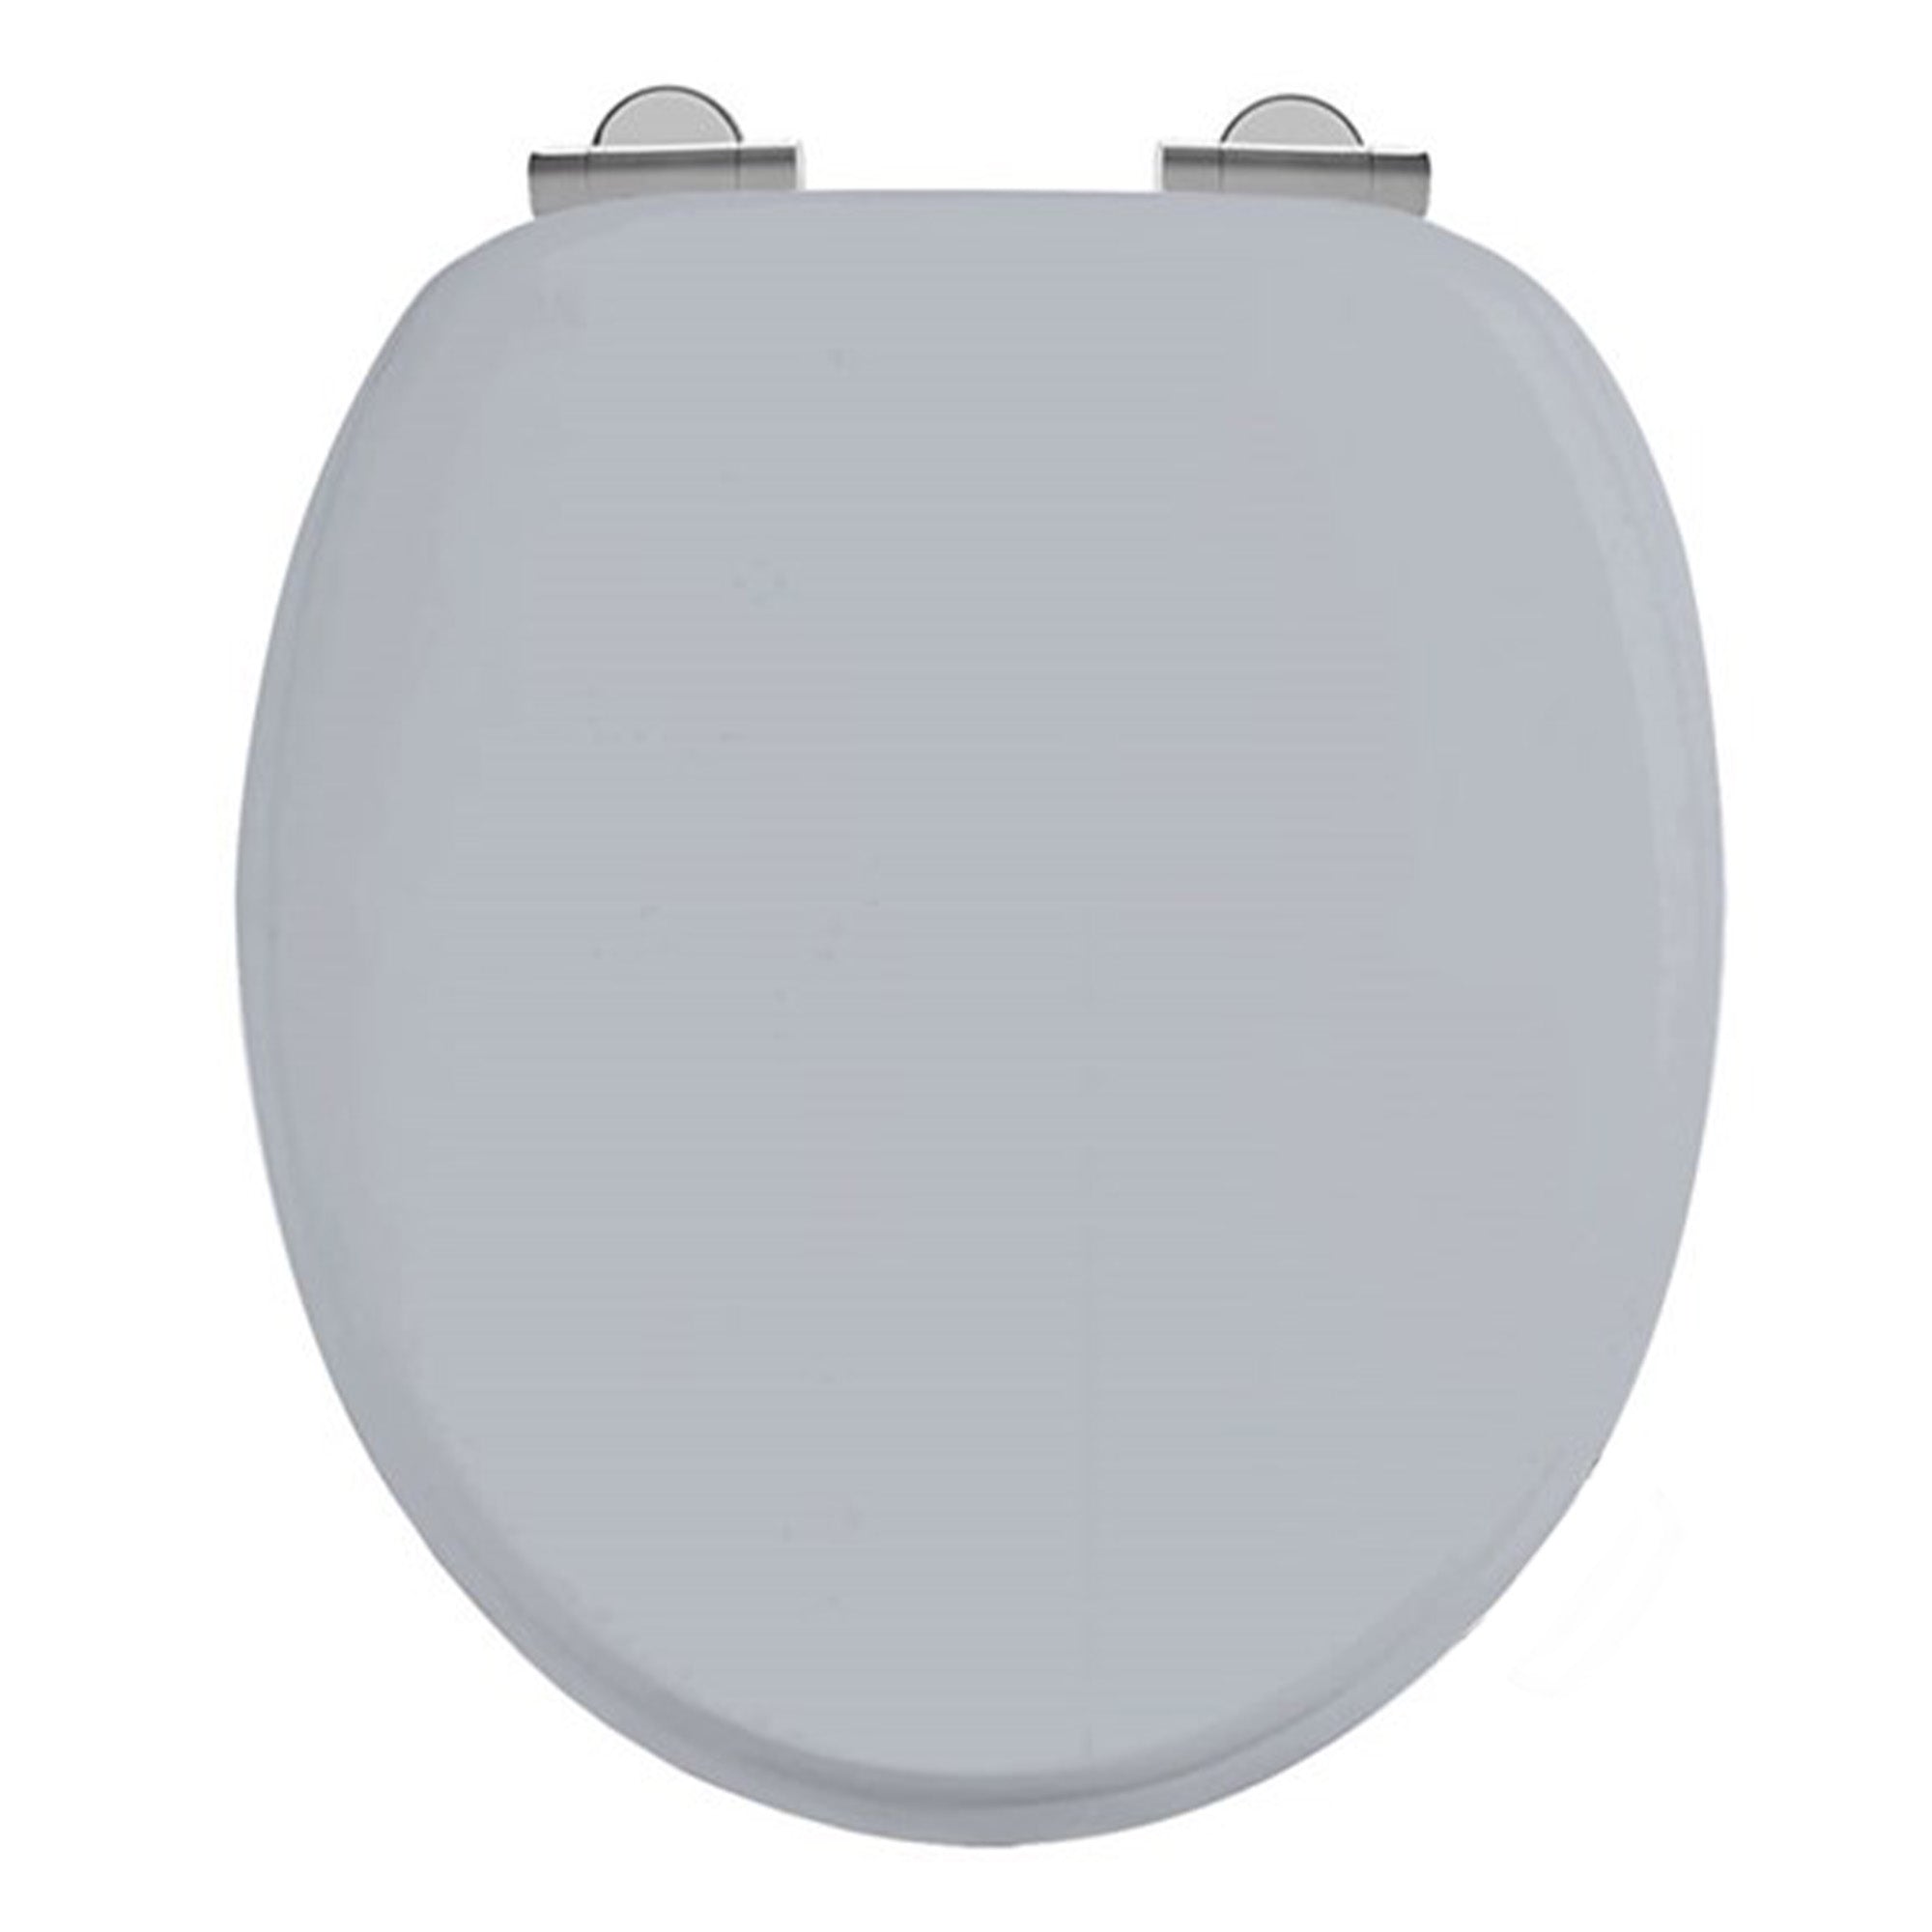 Burlington Traditional Toilet Seat With Chrome Soft Close Hinges - Classic Grey